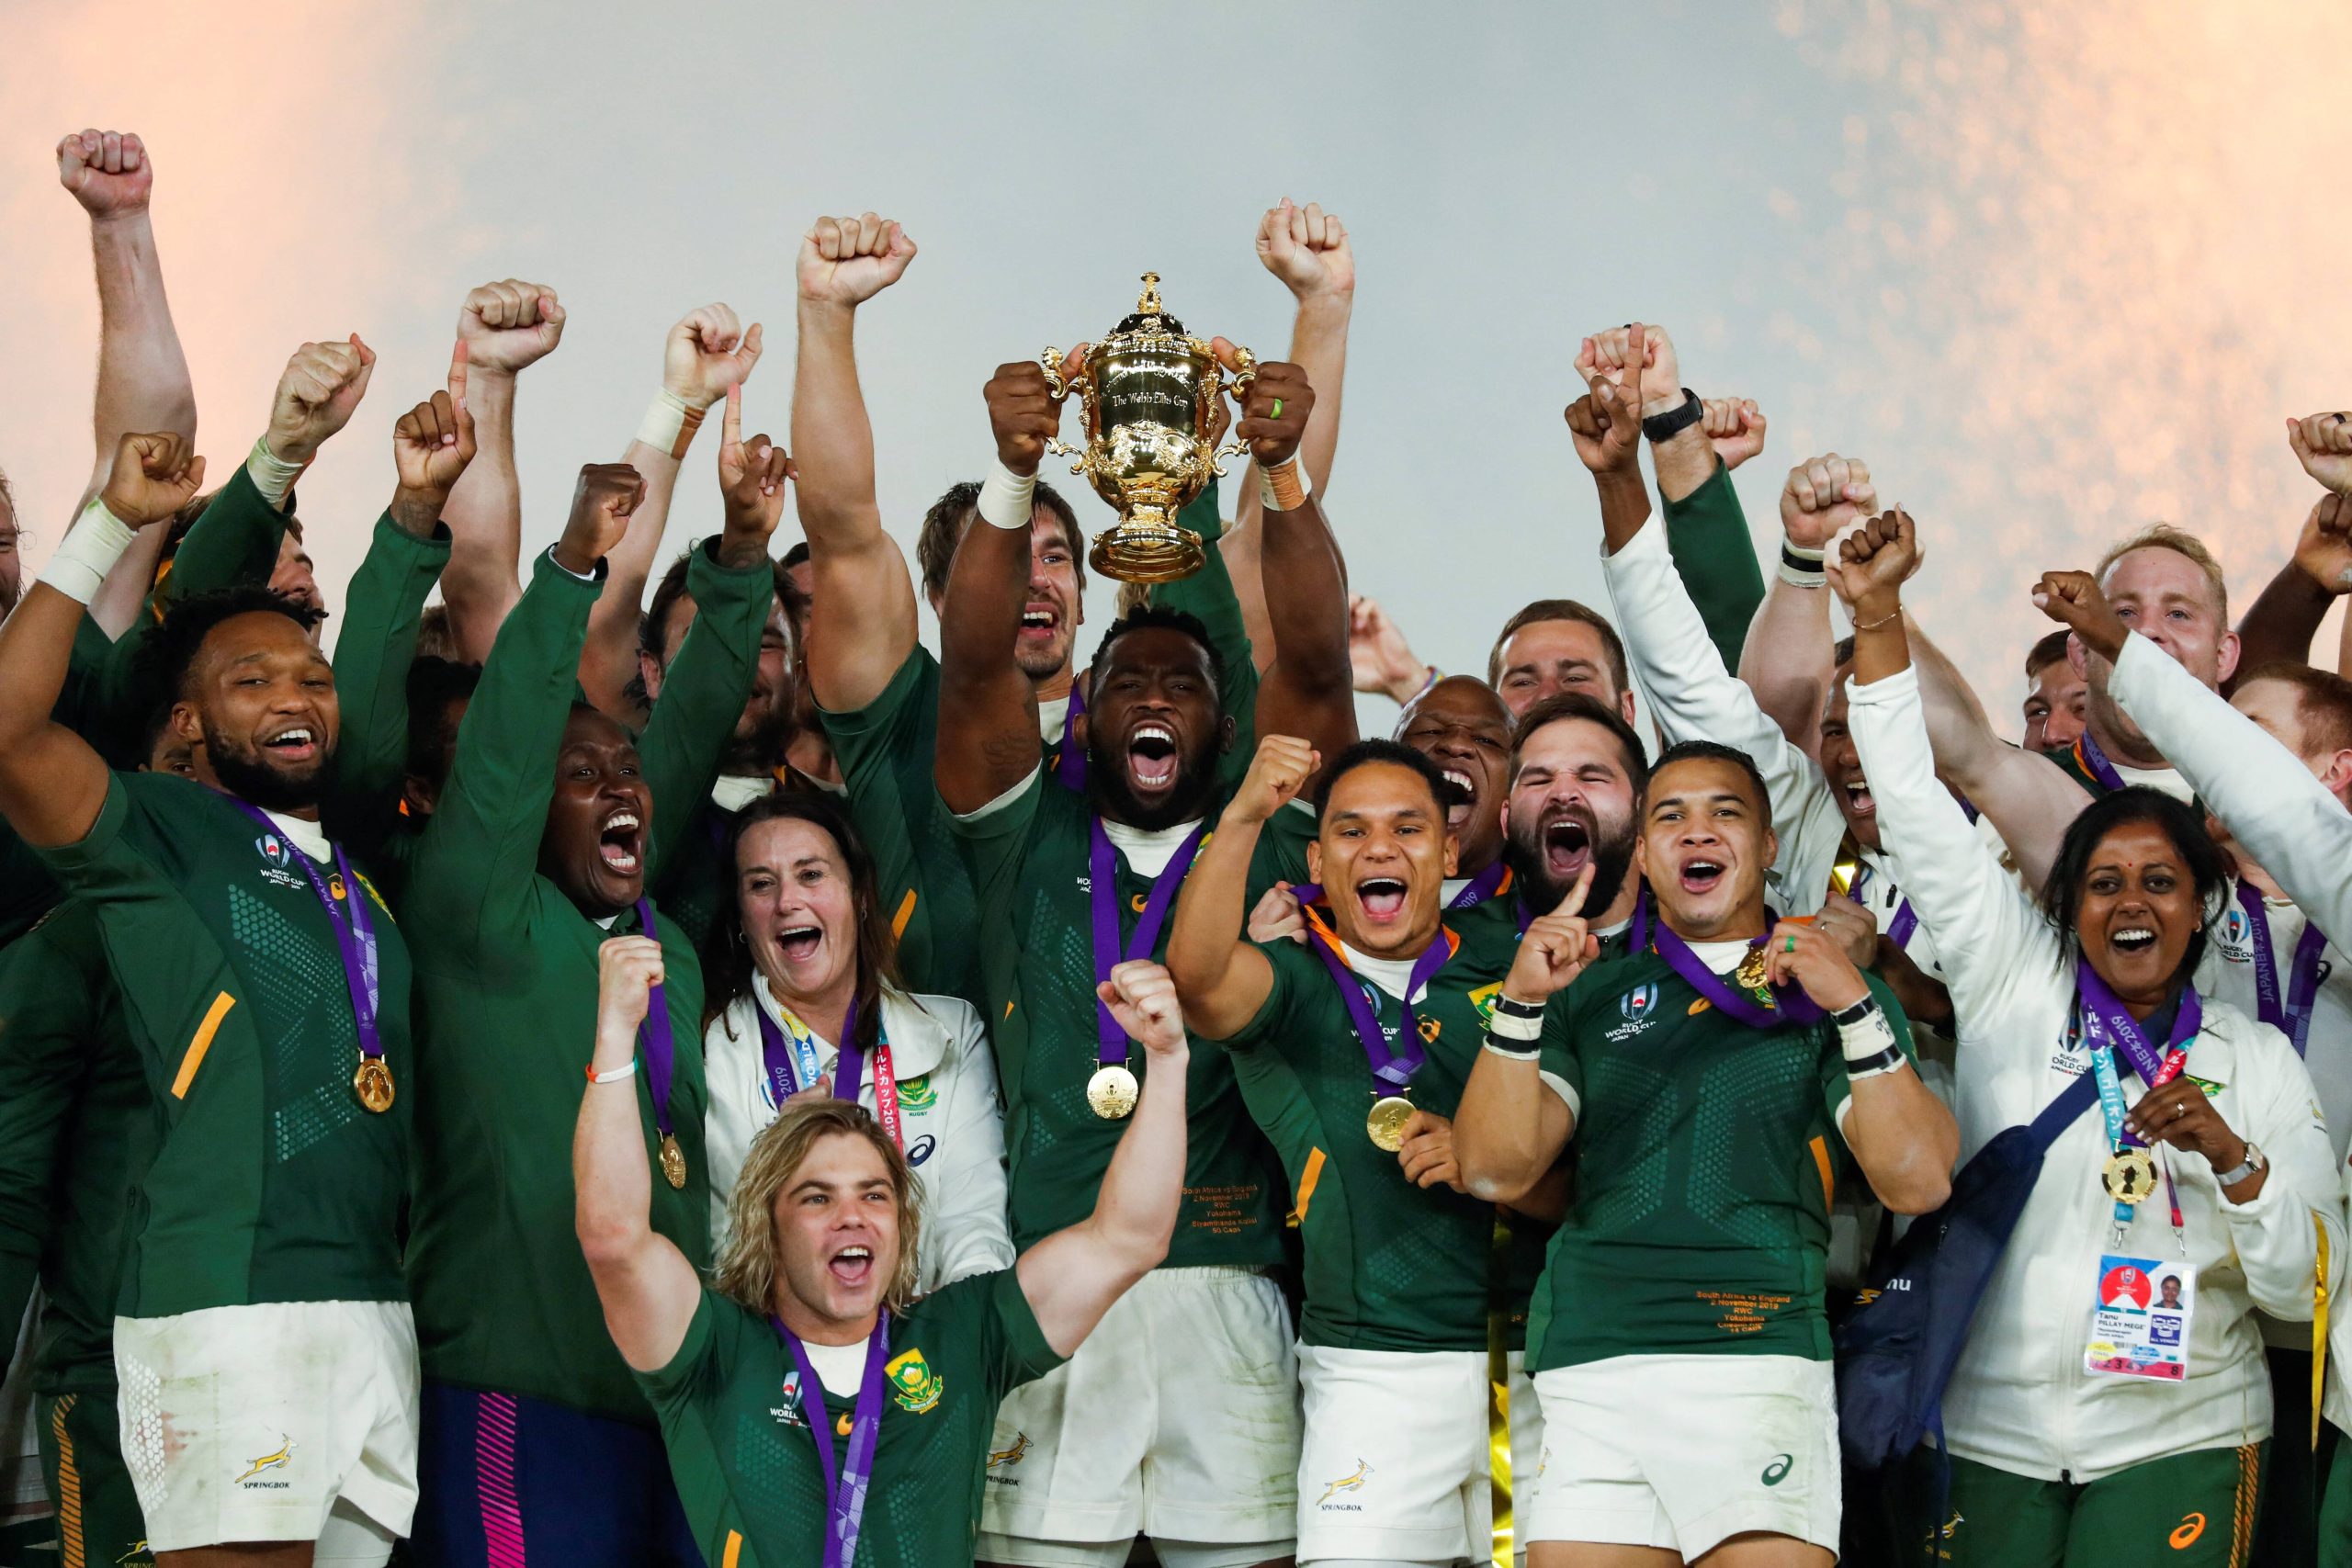 South Africa will settle in Toulon for the 2023 Rugby World Cup

